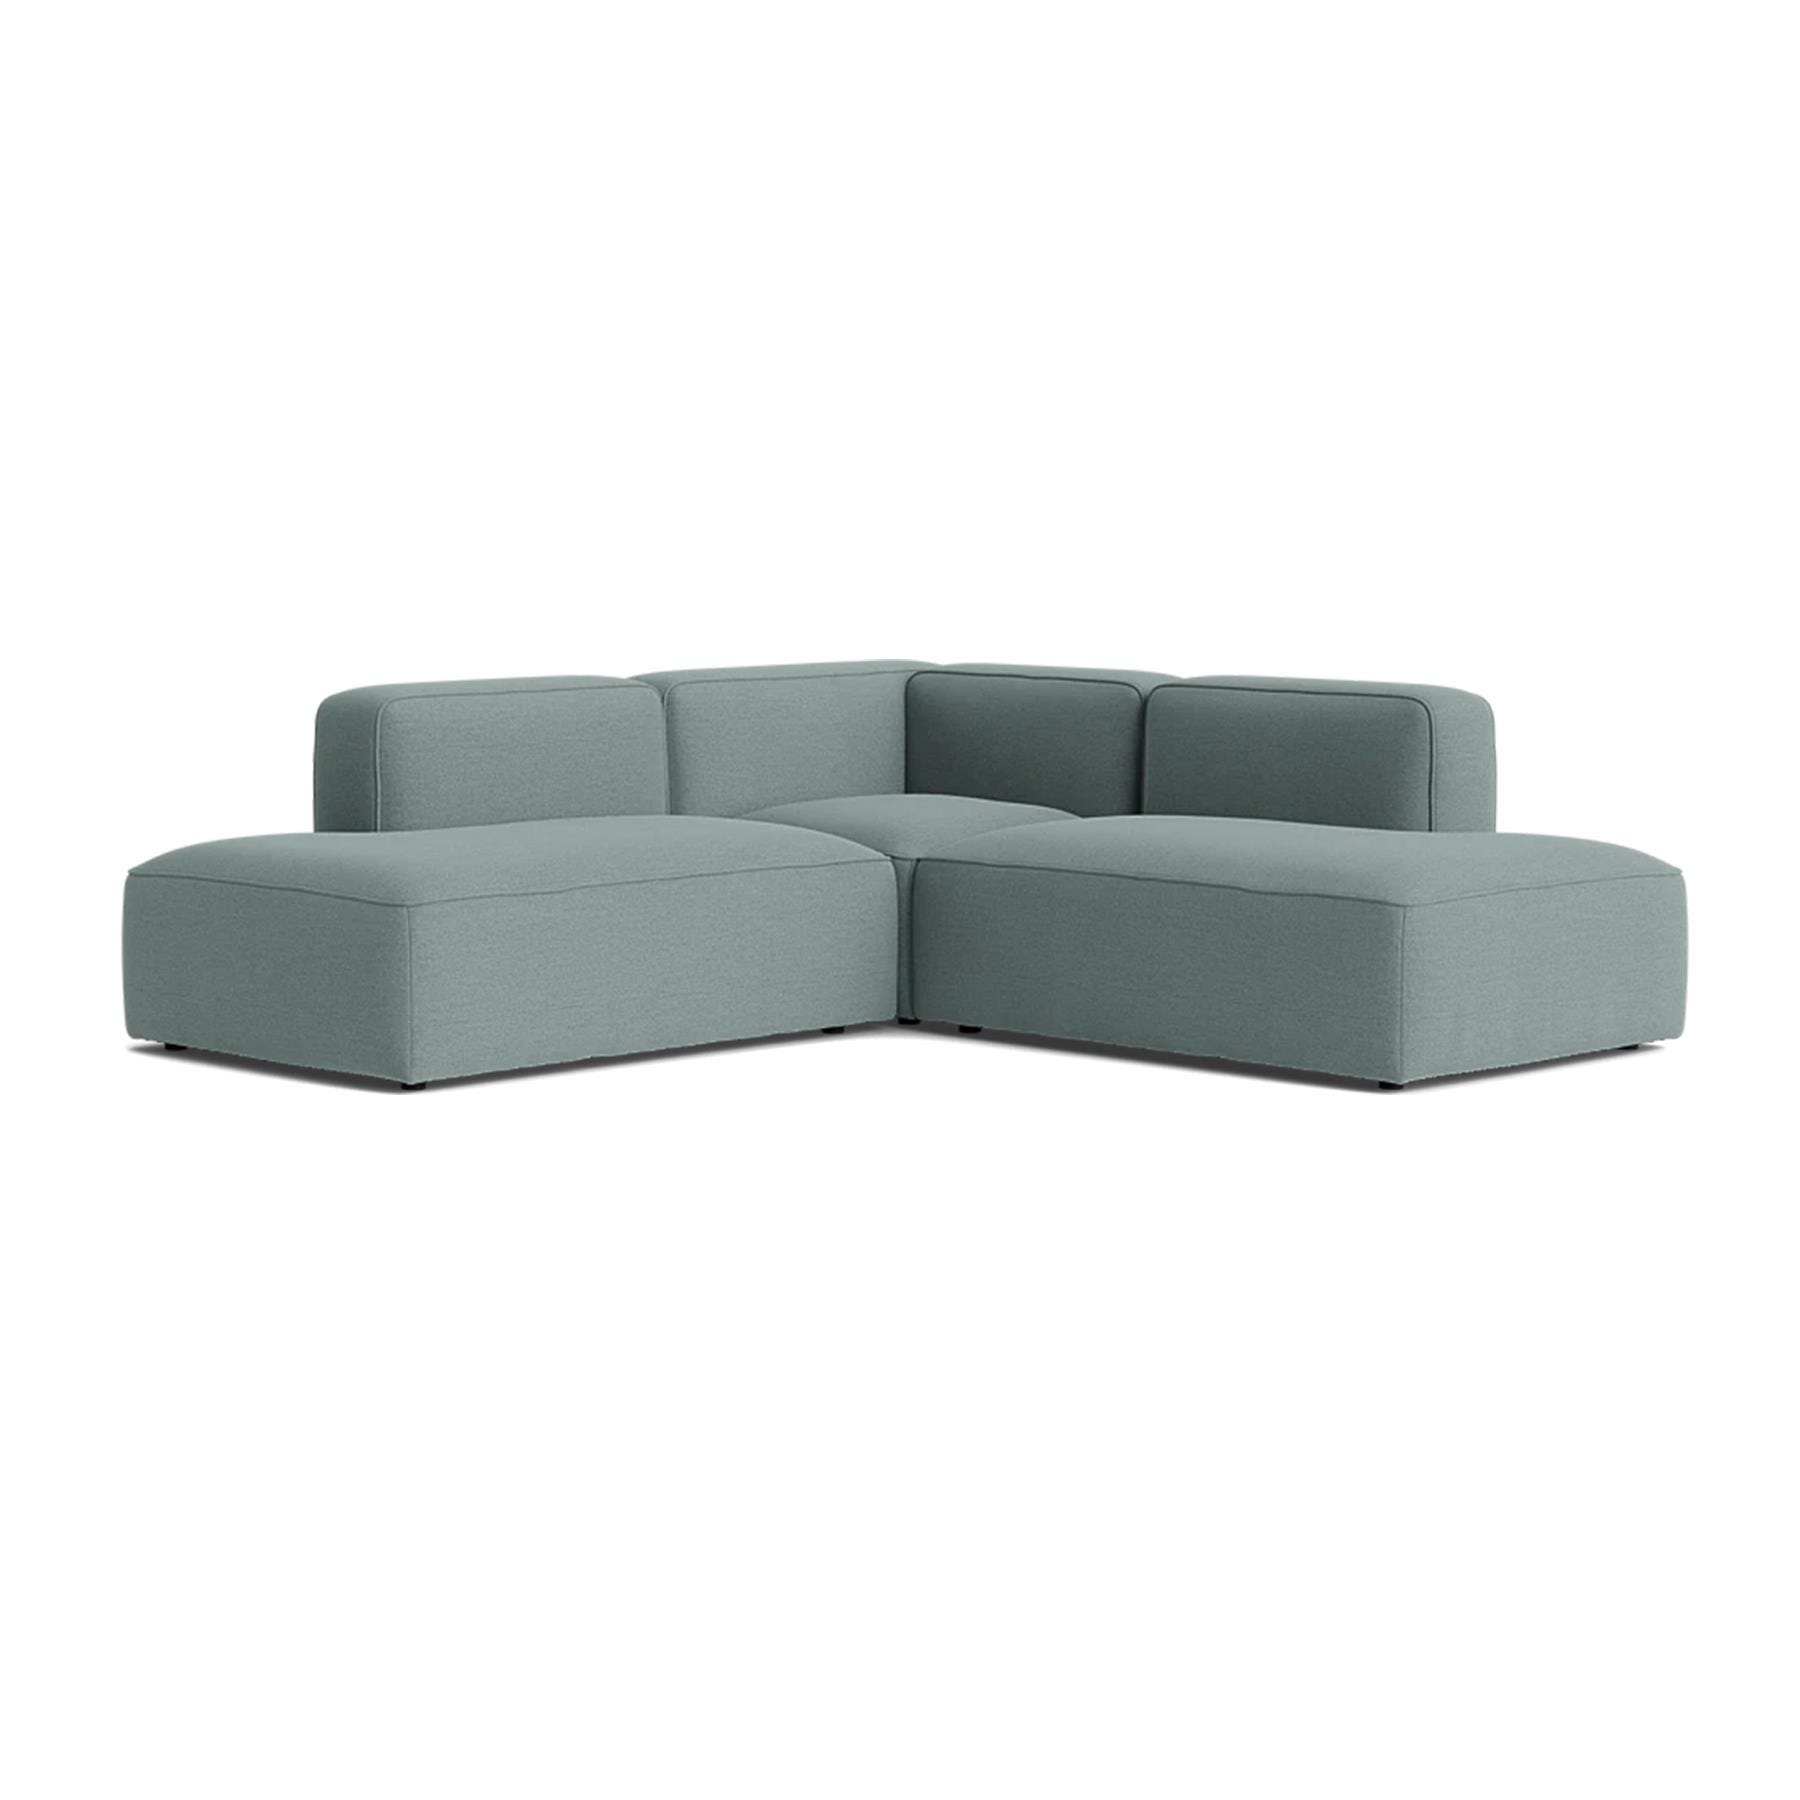 Make Nordic Basecamp Corner Sofa With Open Ends Rewool 868 Green Designer Furniture From Holloways Of Ludlow